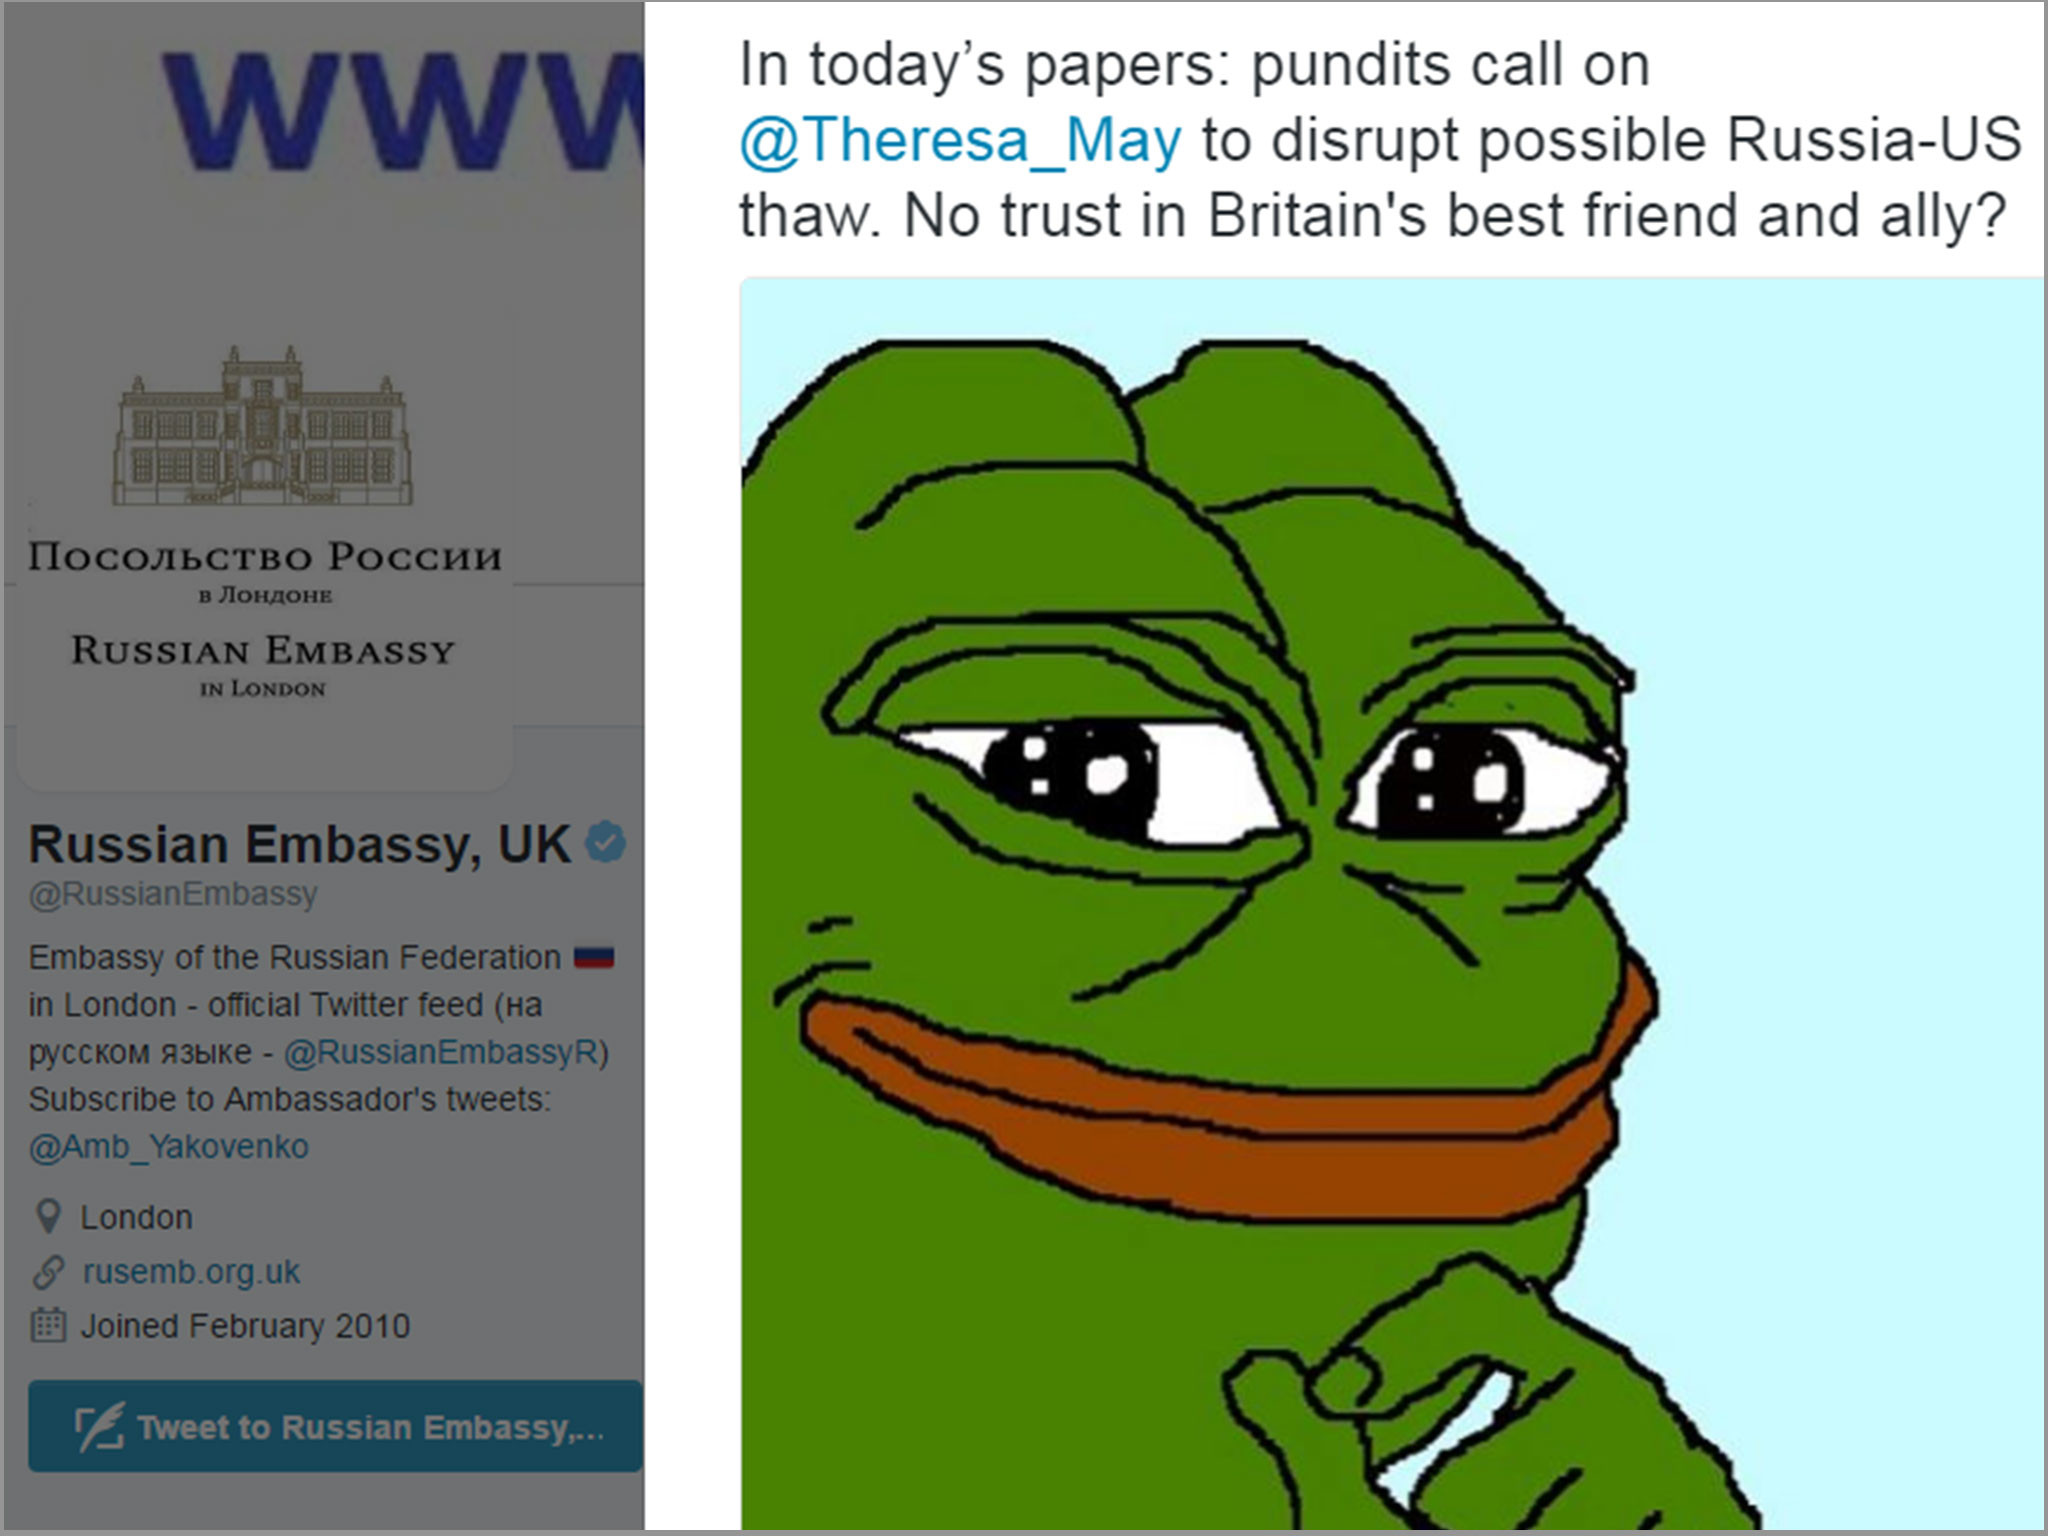 2048x1536 Russian embassy in London hits out at Theresa May with 'white supremacist'  Pepe the Frog meme | The Independent